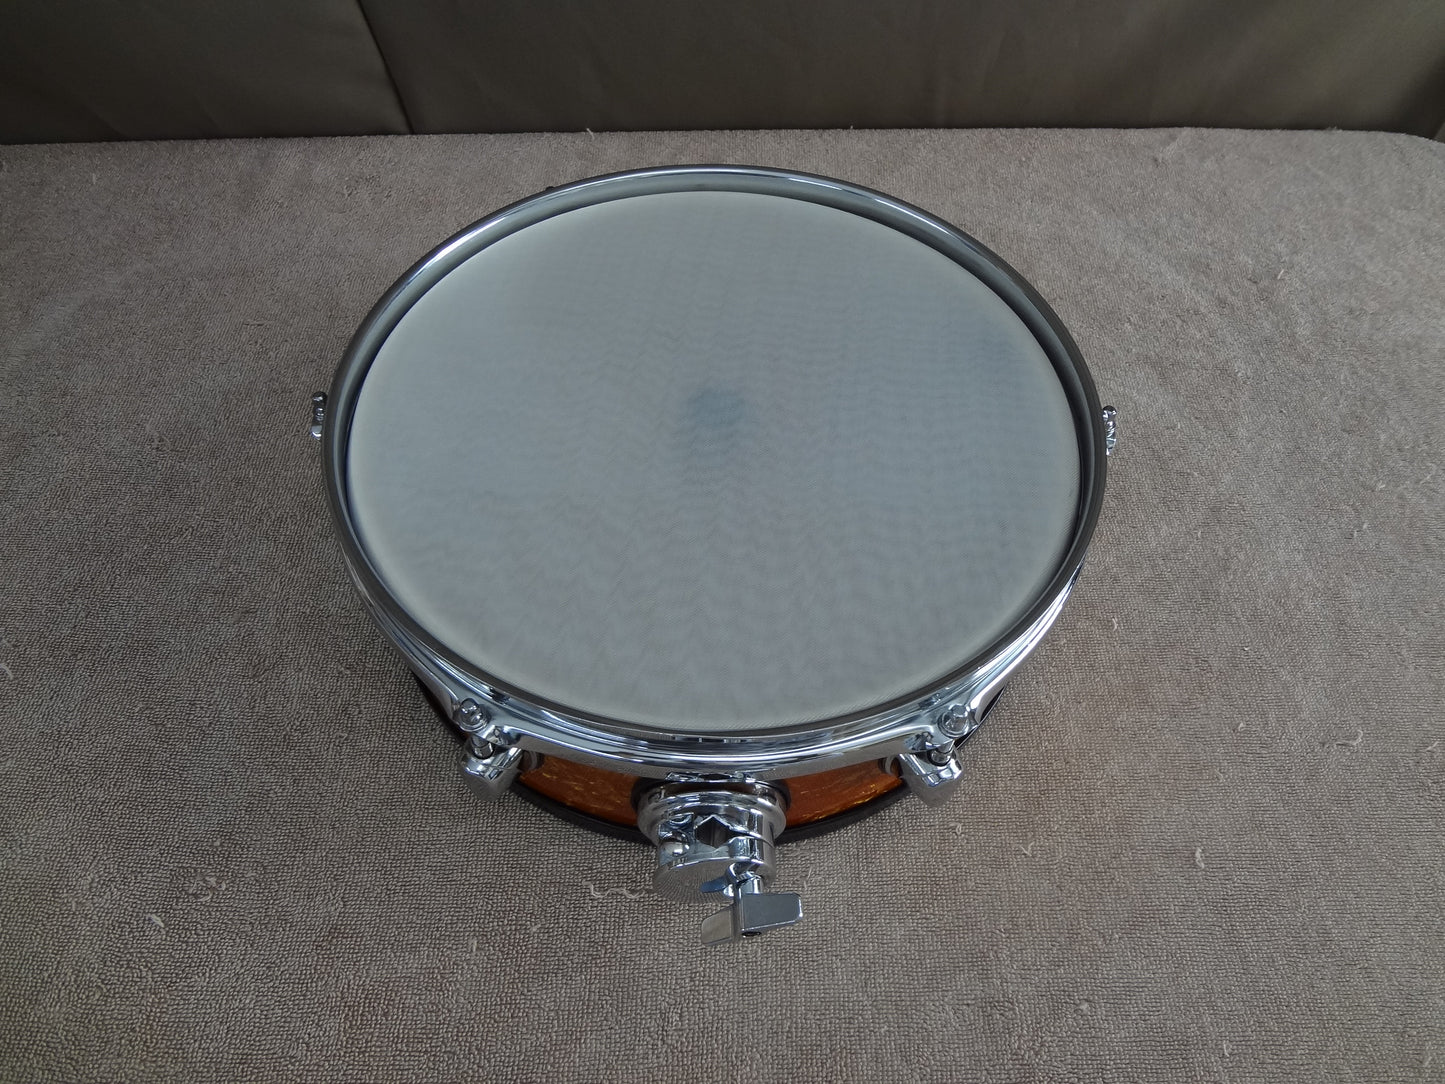 New 12 Inch Custom Electronic Snare Drum - Orange Pearl